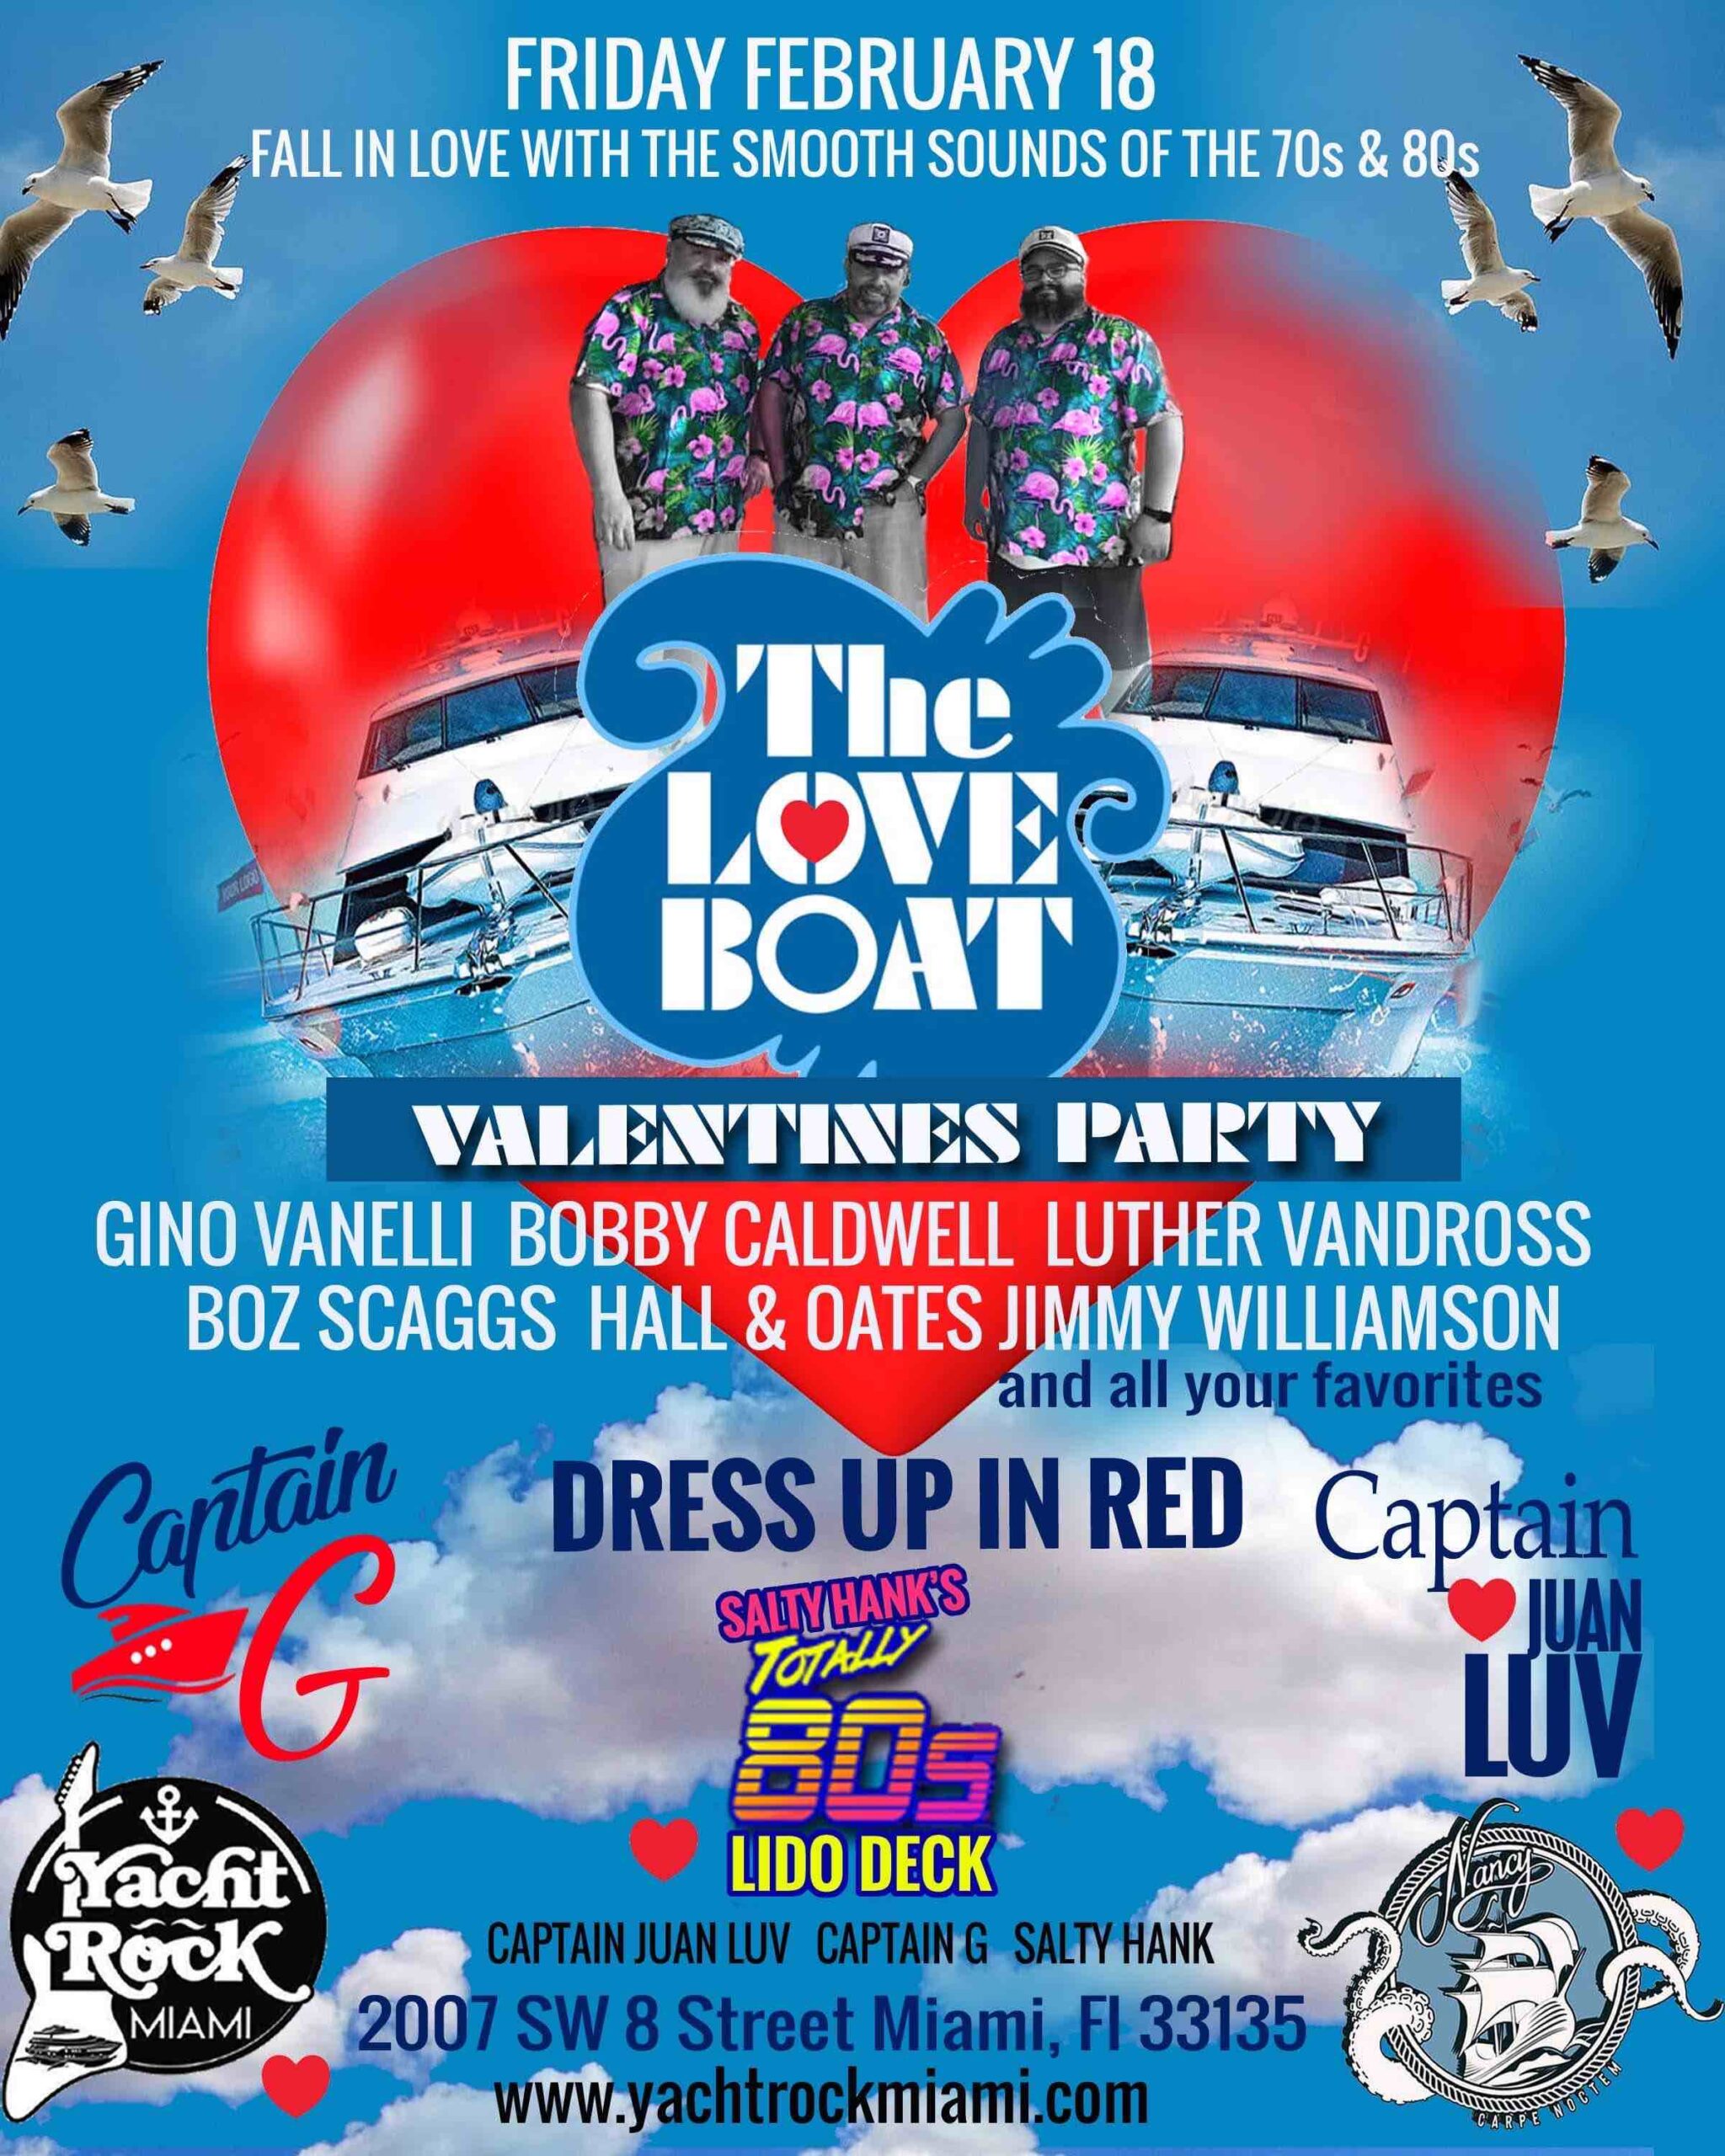 YACHT ROCK Presents - THE LOVE BOAT - Valentines Party